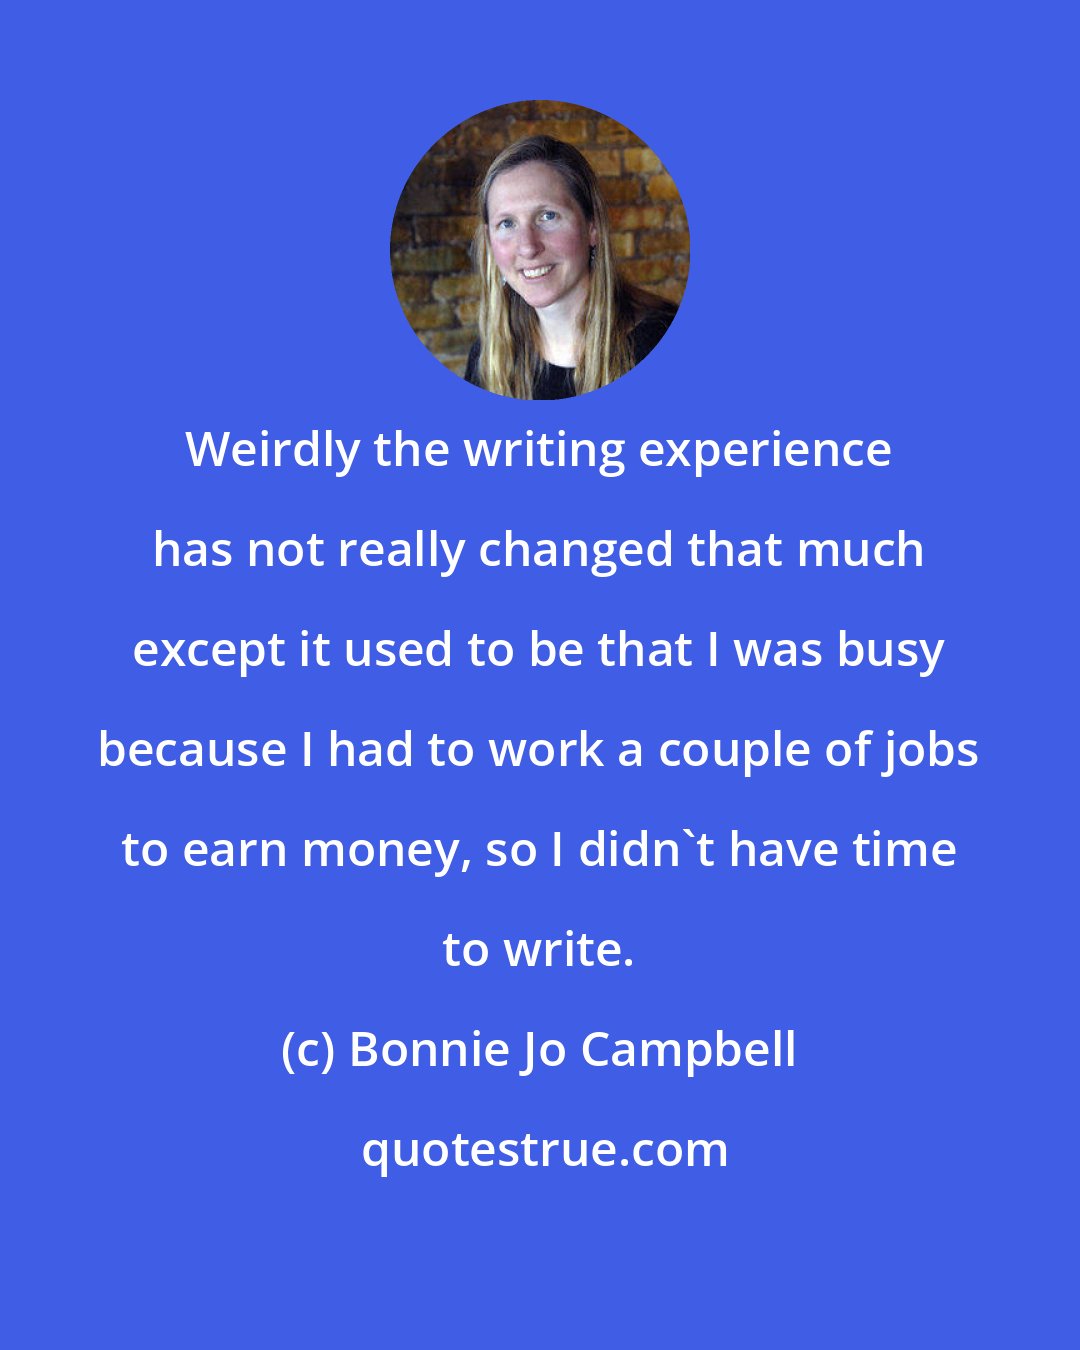 Bonnie Jo Campbell: Weirdly the writing experience has not really changed that much except it used to be that I was busy because I had to work a couple of jobs to earn money, so I didn't have time to write.